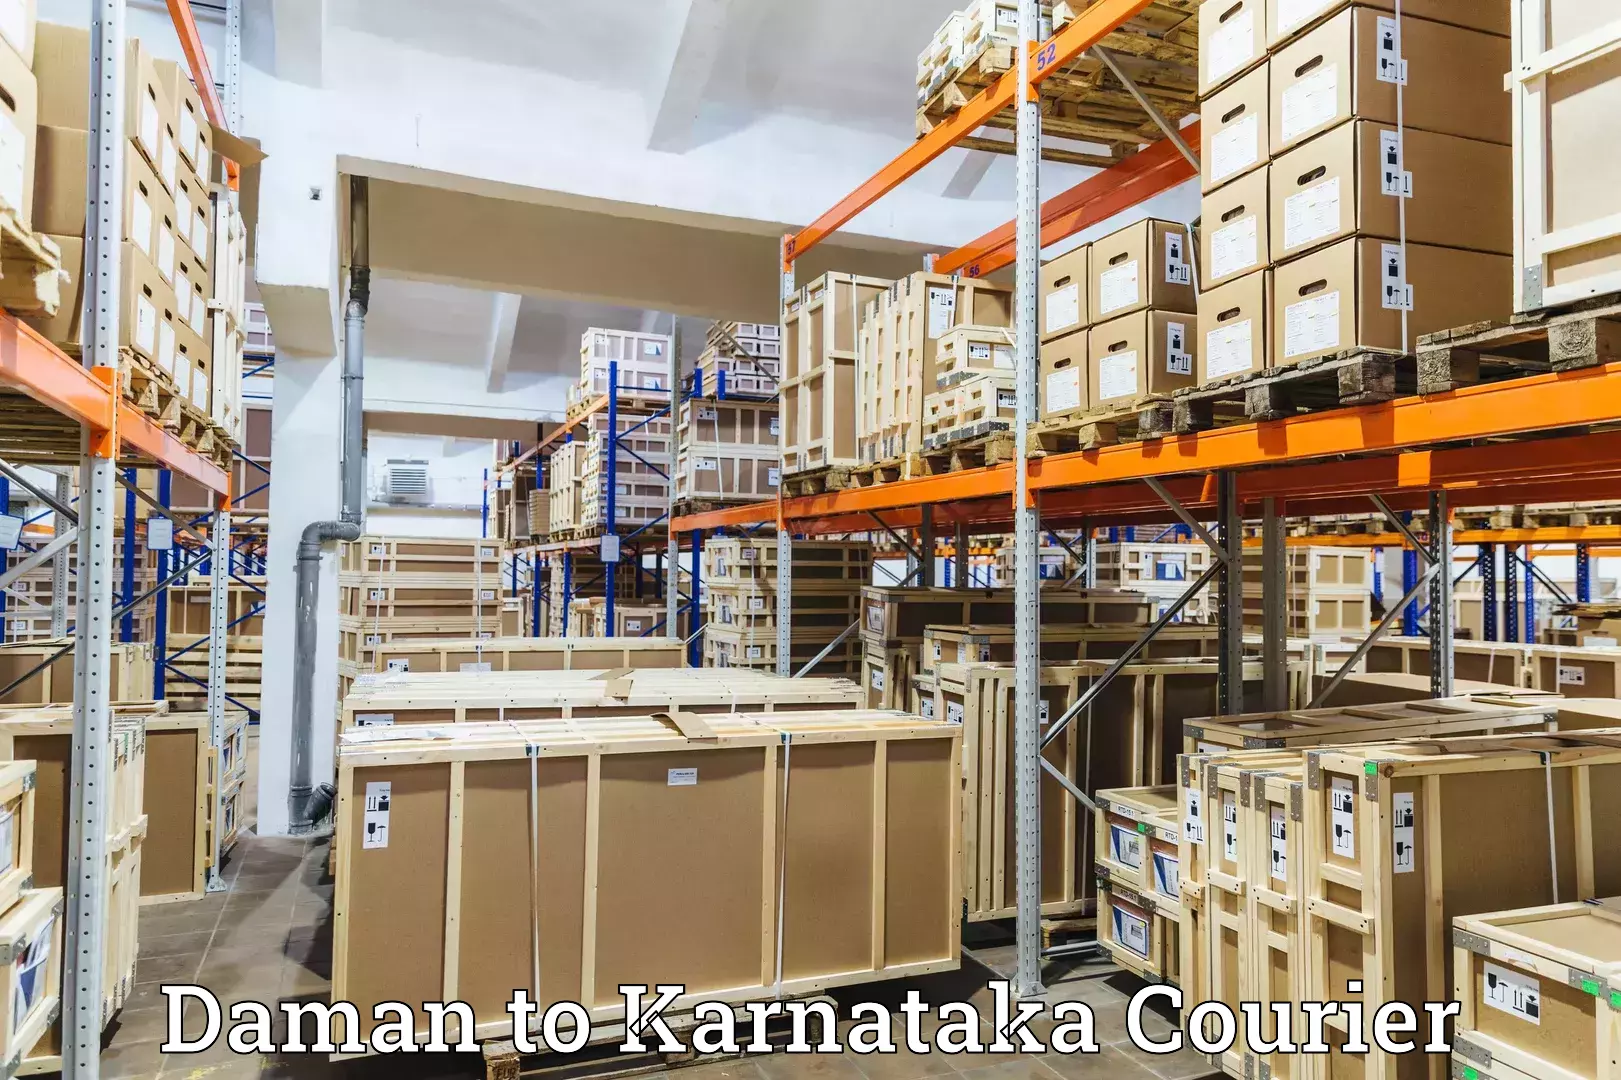 User-friendly delivery service Daman to Bangalore